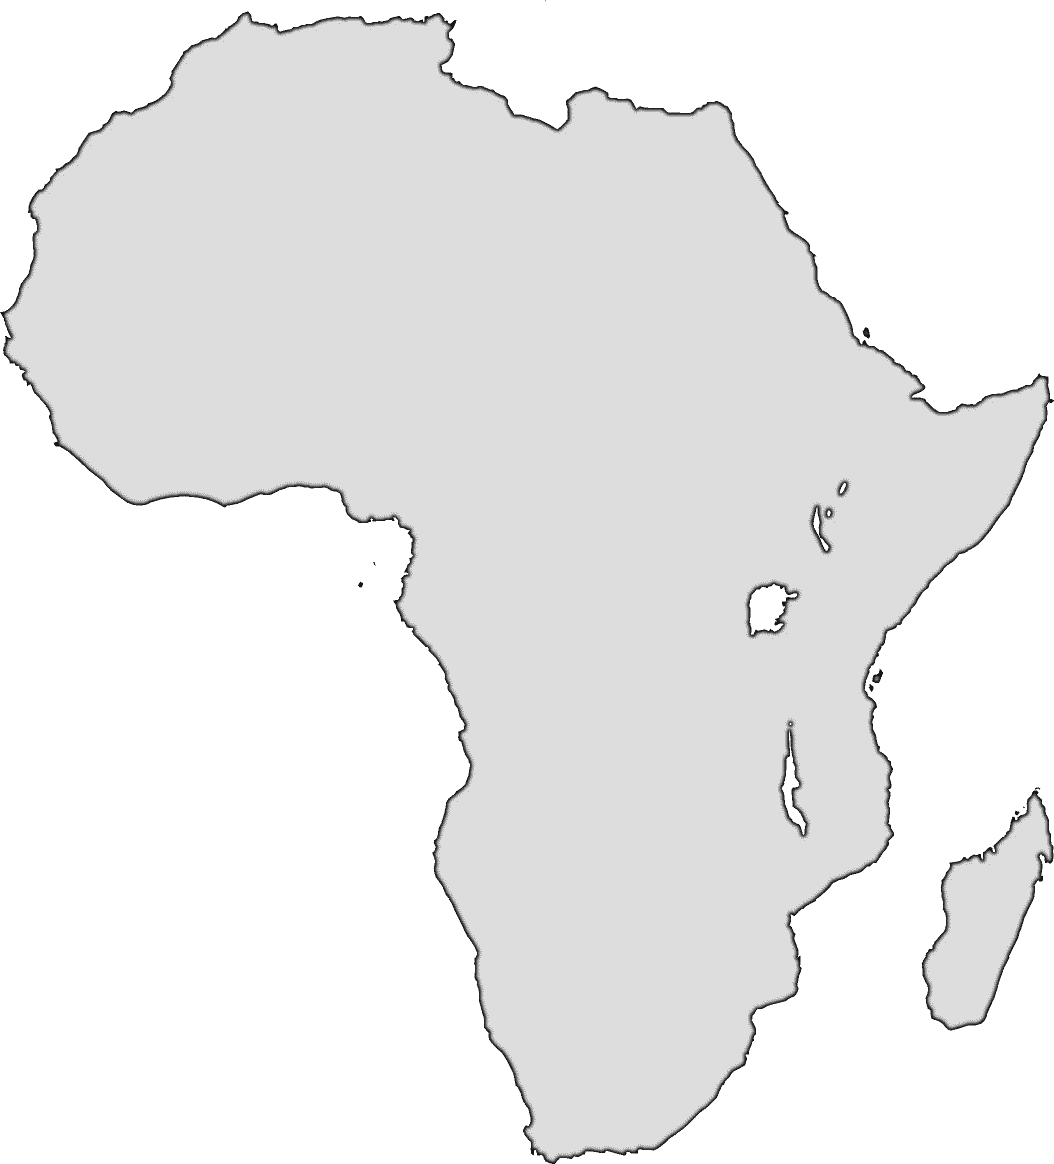 Africa clipart plain. Cliparts making the web